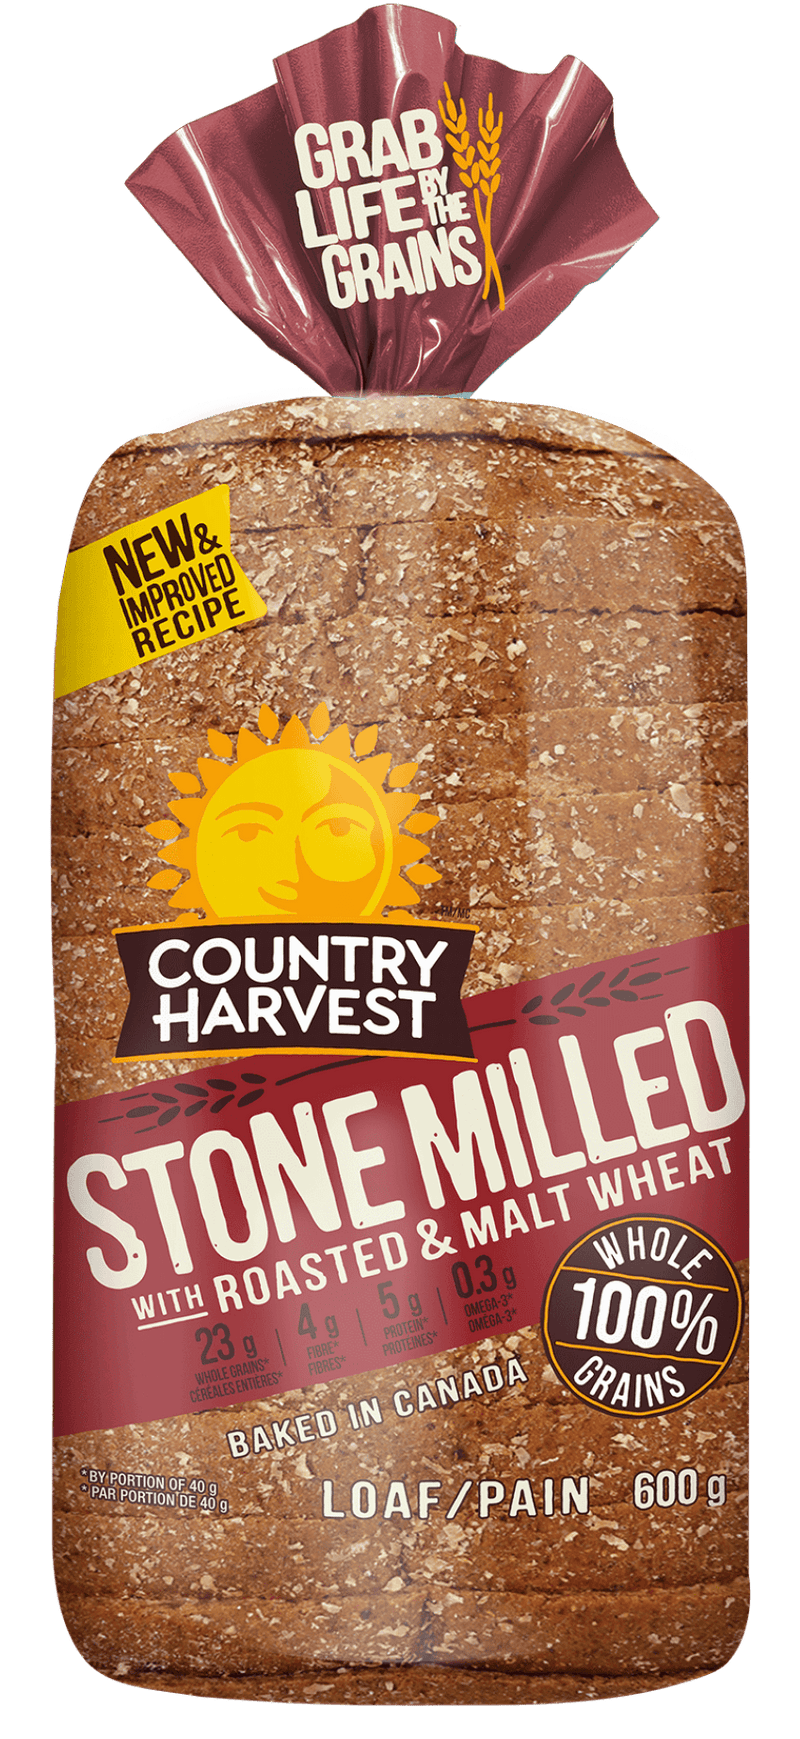 Crountry Harvest Stone Milled